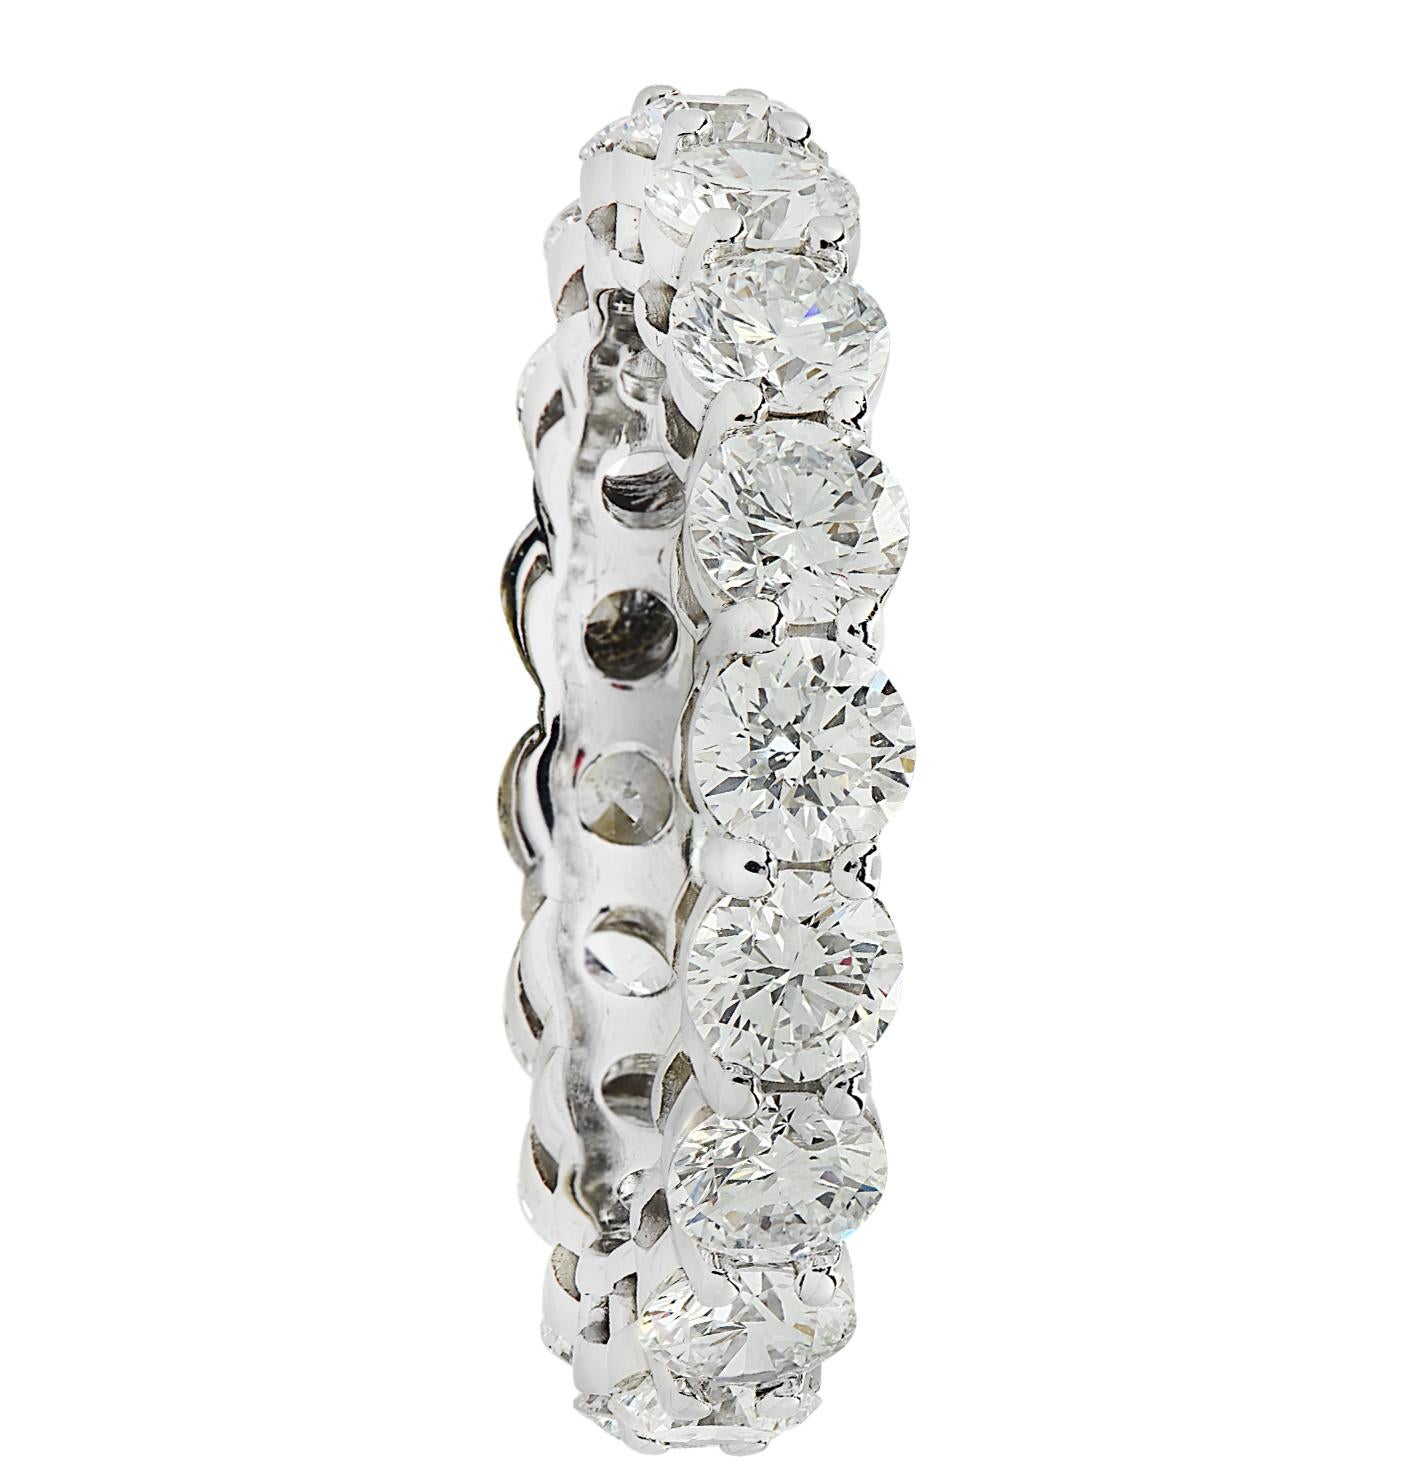 Exquisite eternity band crafted in Platinum, showcasing 18 stunning round brilliant cut diamonds weighing approximately 3 carats total, F color, VS clarity. Each diamond was carefully selected, perfectly matched and set in a seamless sea of